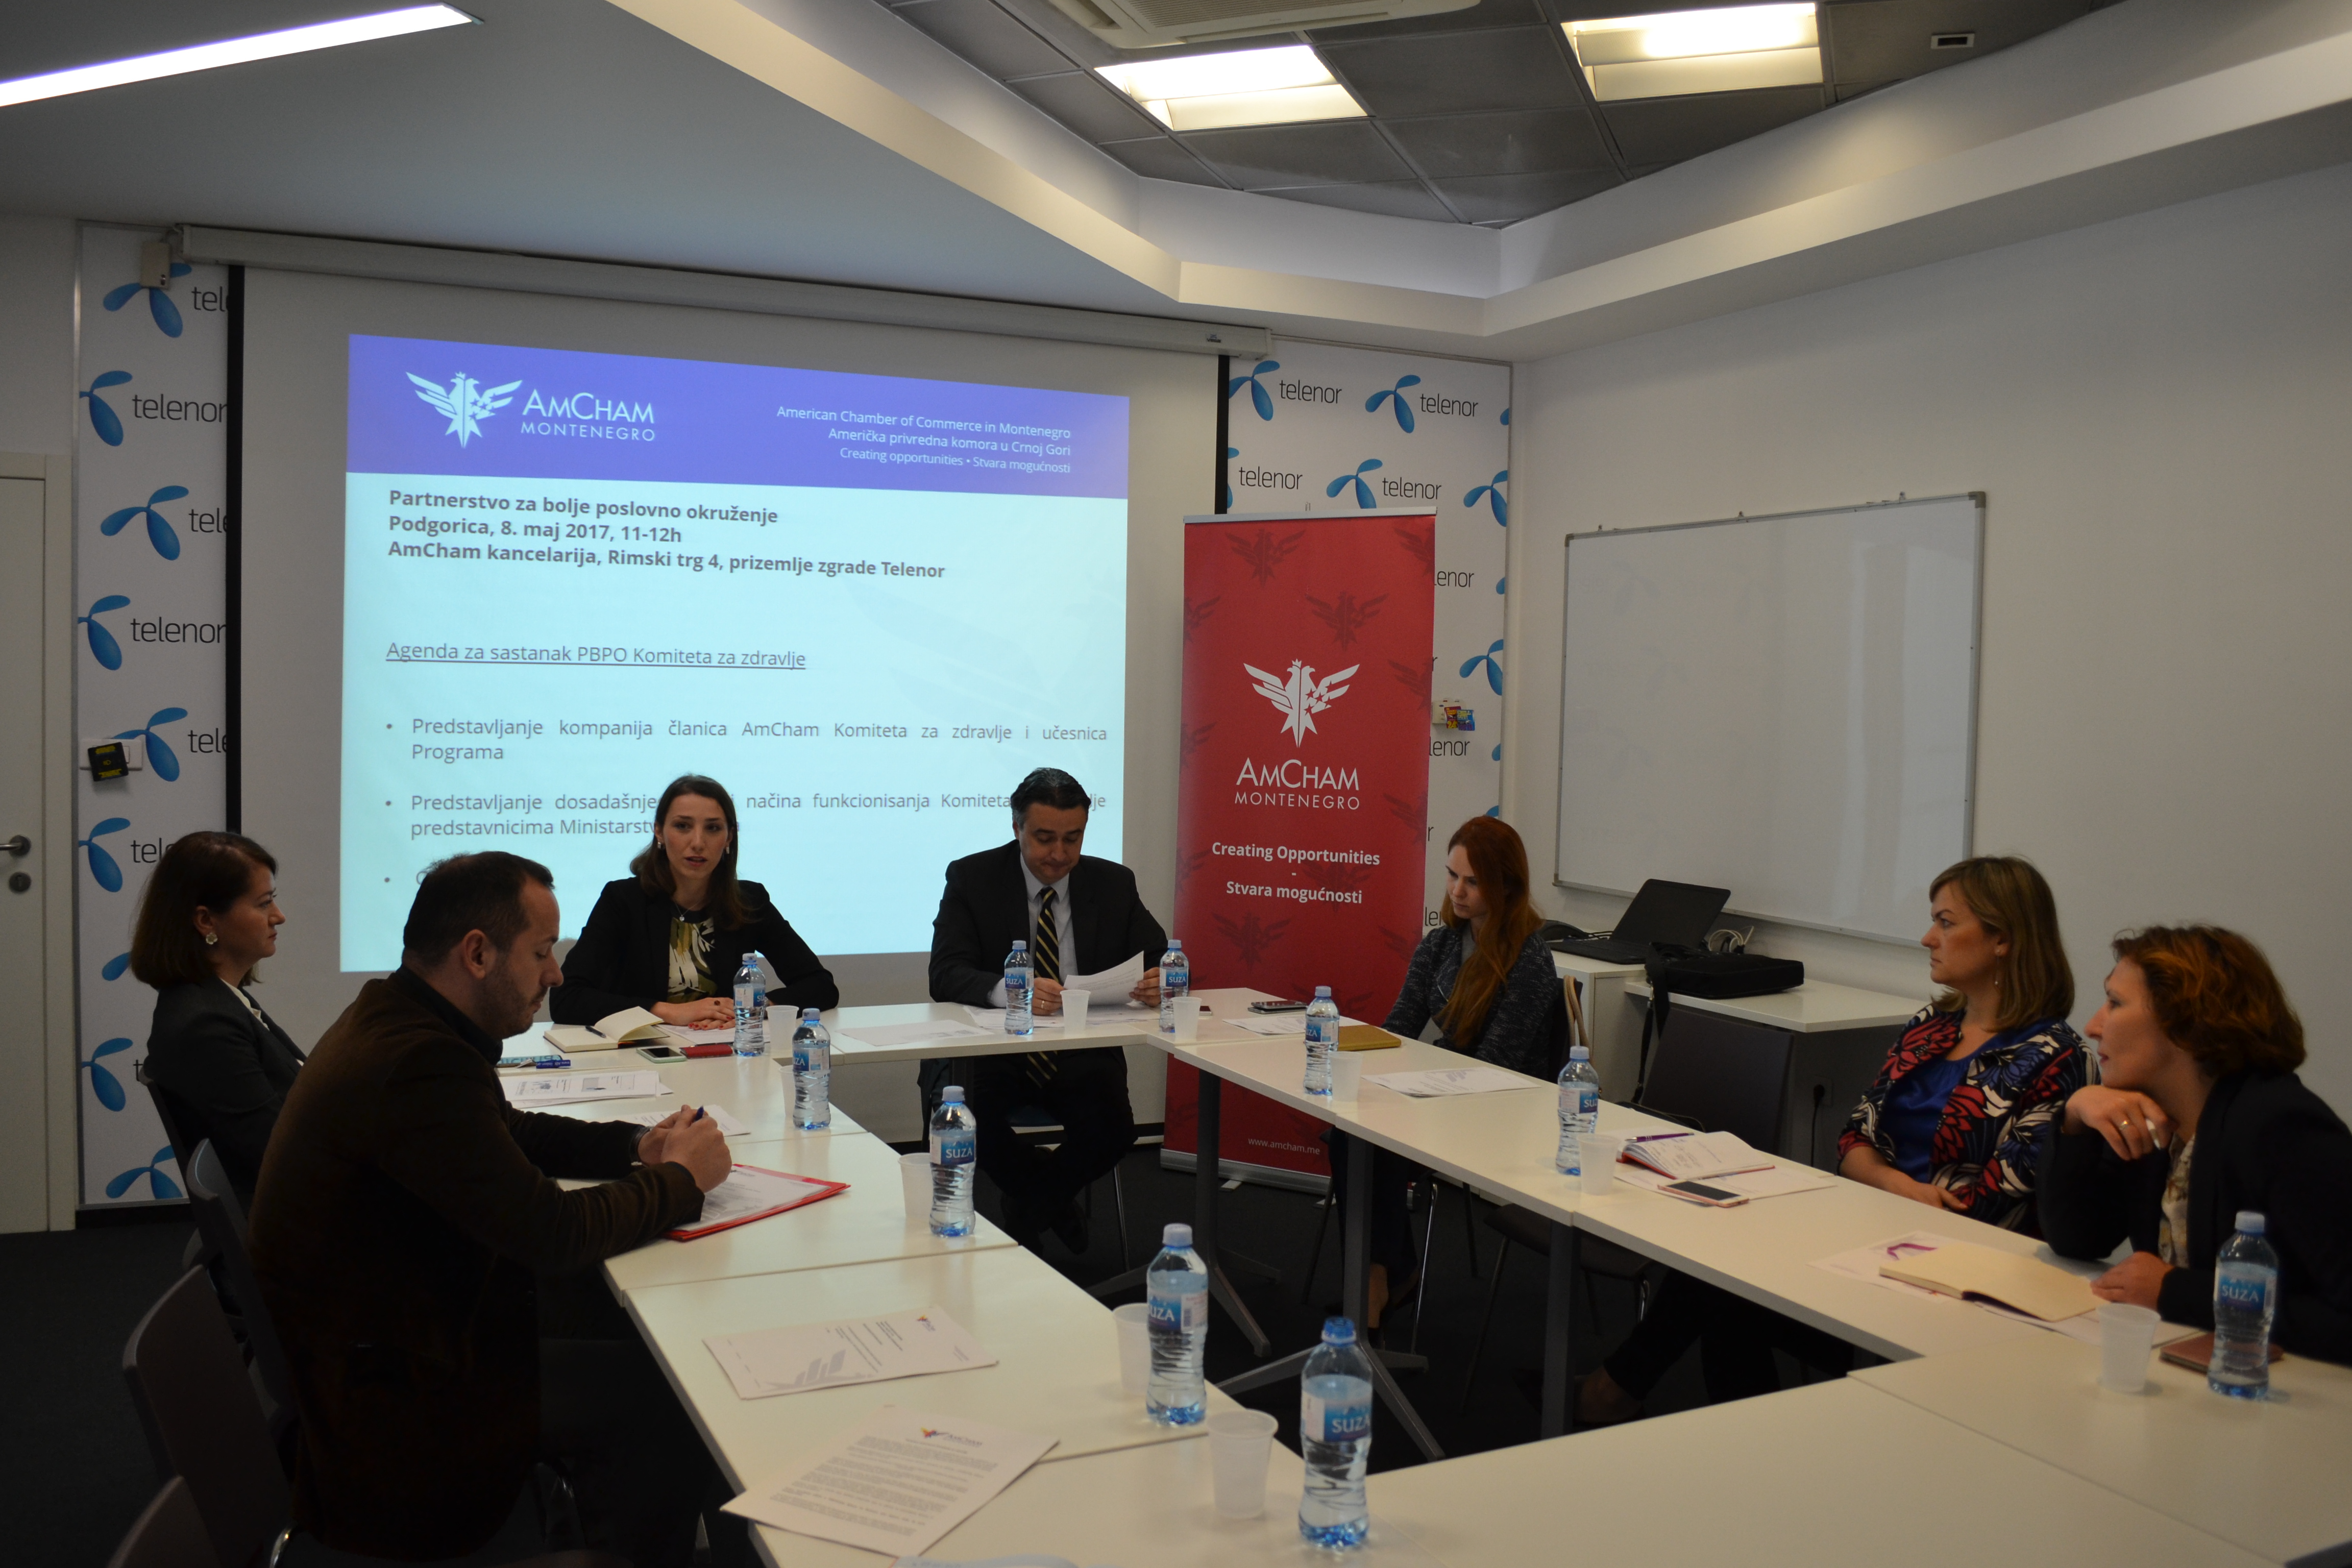 Meeting of AmCham Health Care Committee within Partnership for a Better Business Environment